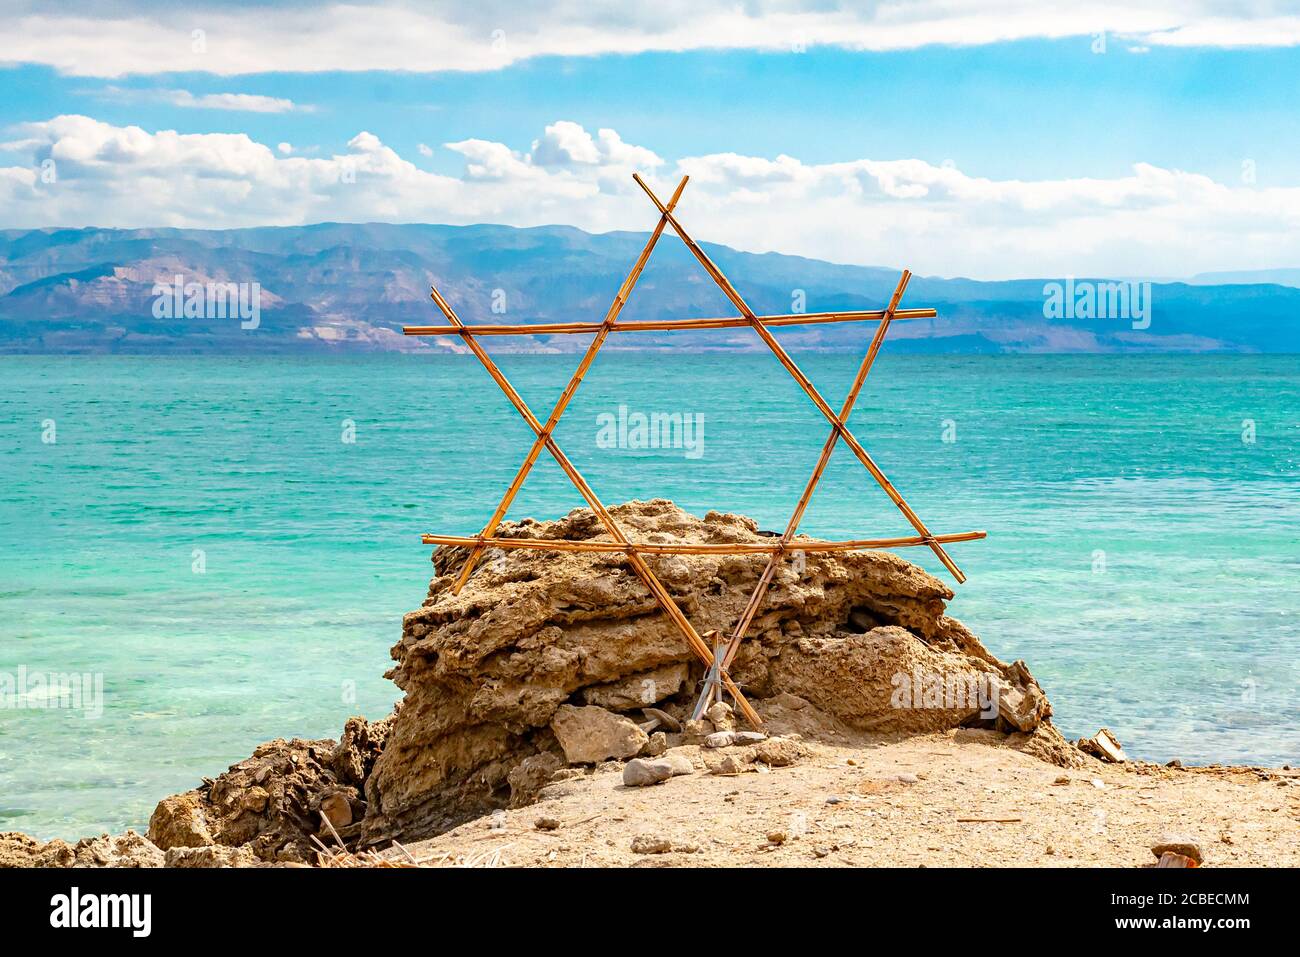 Wooden Shield of David (Magen David or Star of David) with the Dead Sea in the background Stock Photo